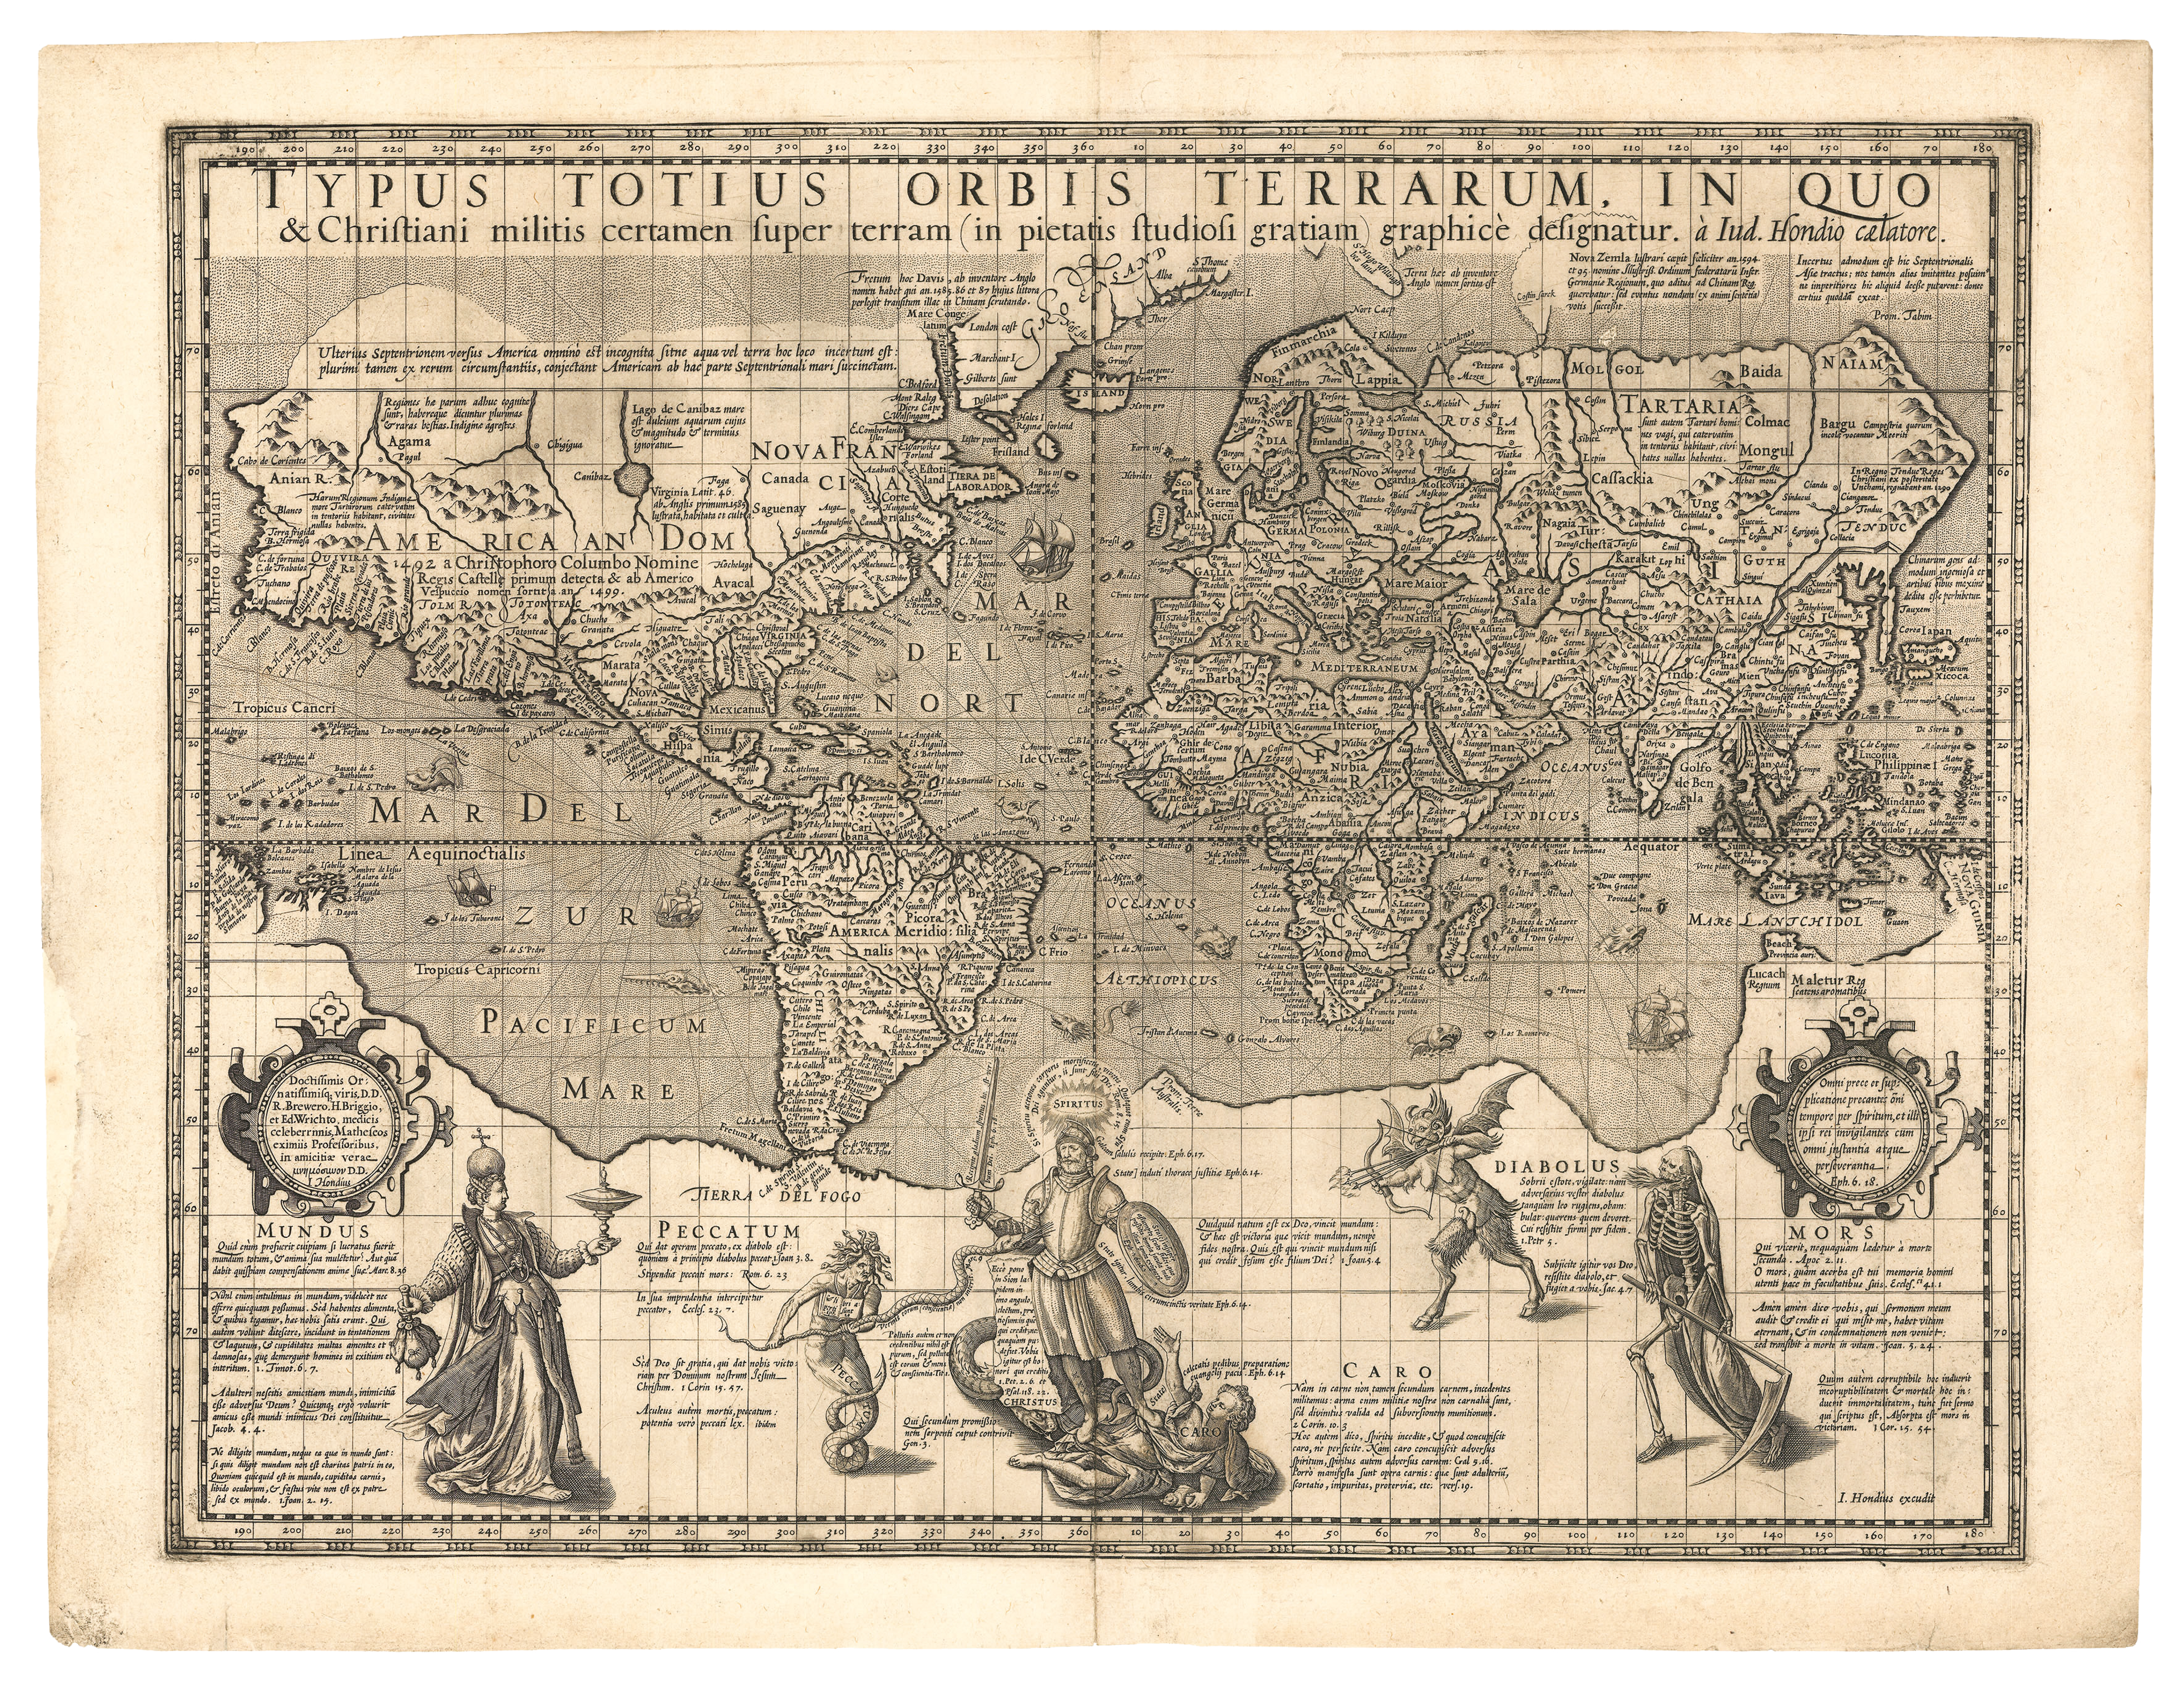 The earliest example of a true Mercator projection in a map, contained in the "Christian Knight Map". This is a black and white map engraved on copperplate. The map is very detailed and below it there is an illustration of an unidentified Christian Knight fighting sin, the devil, carnal desire.